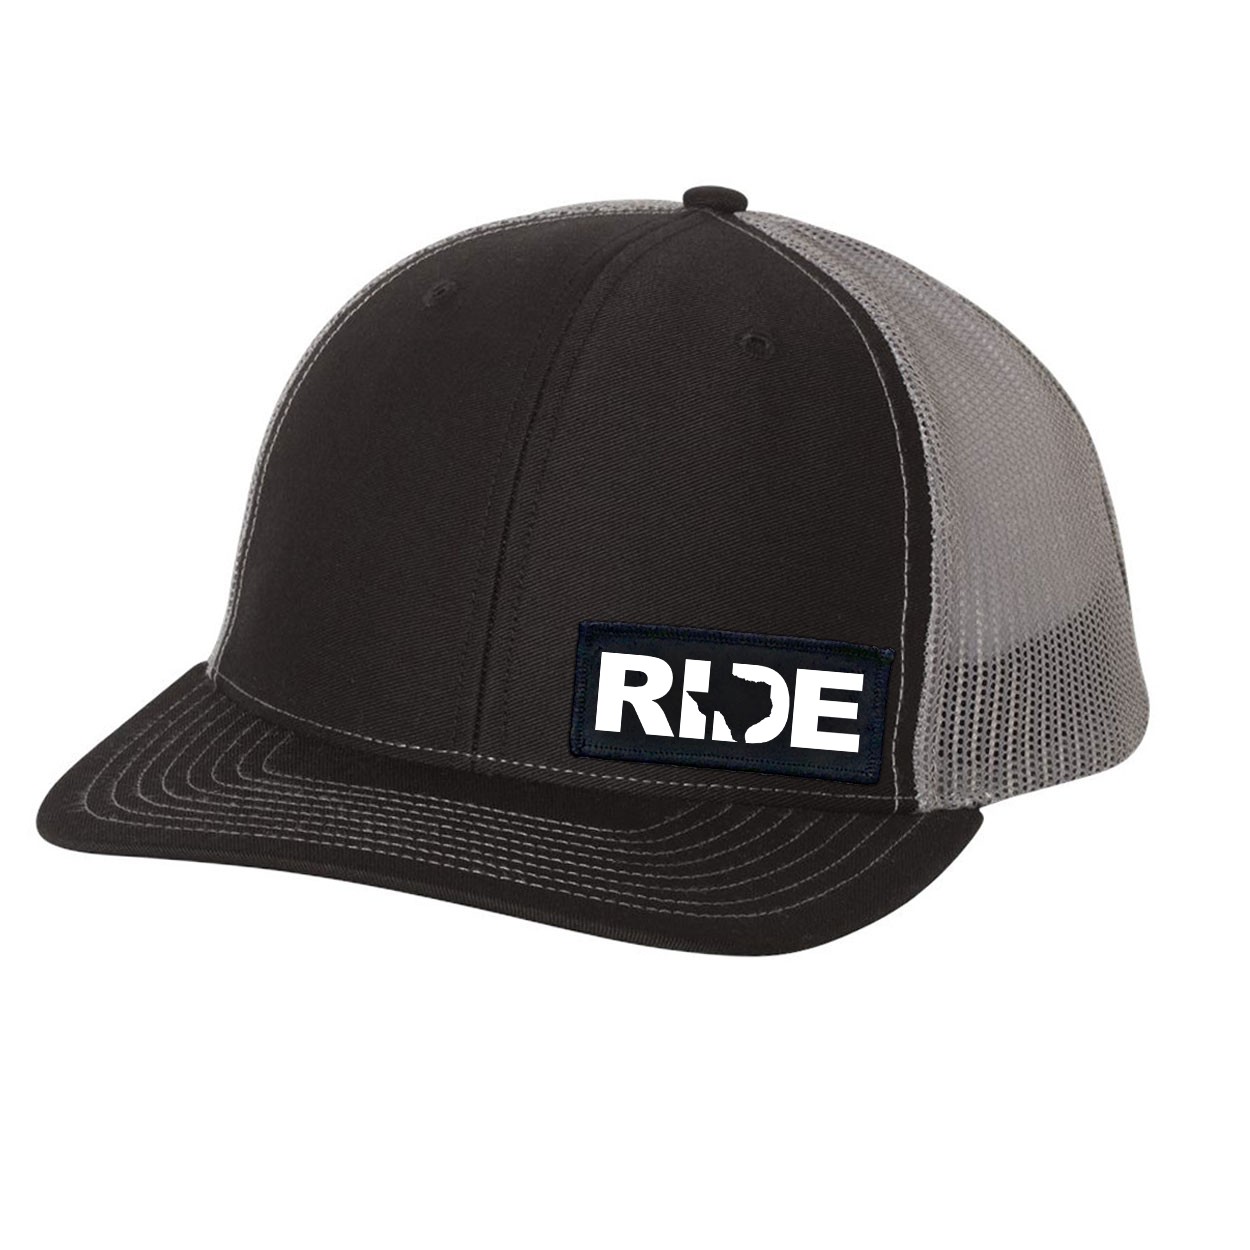 Ride Texas Night Out Woven Patch Snapback Trucker Hat Black/Gray (White Logo)